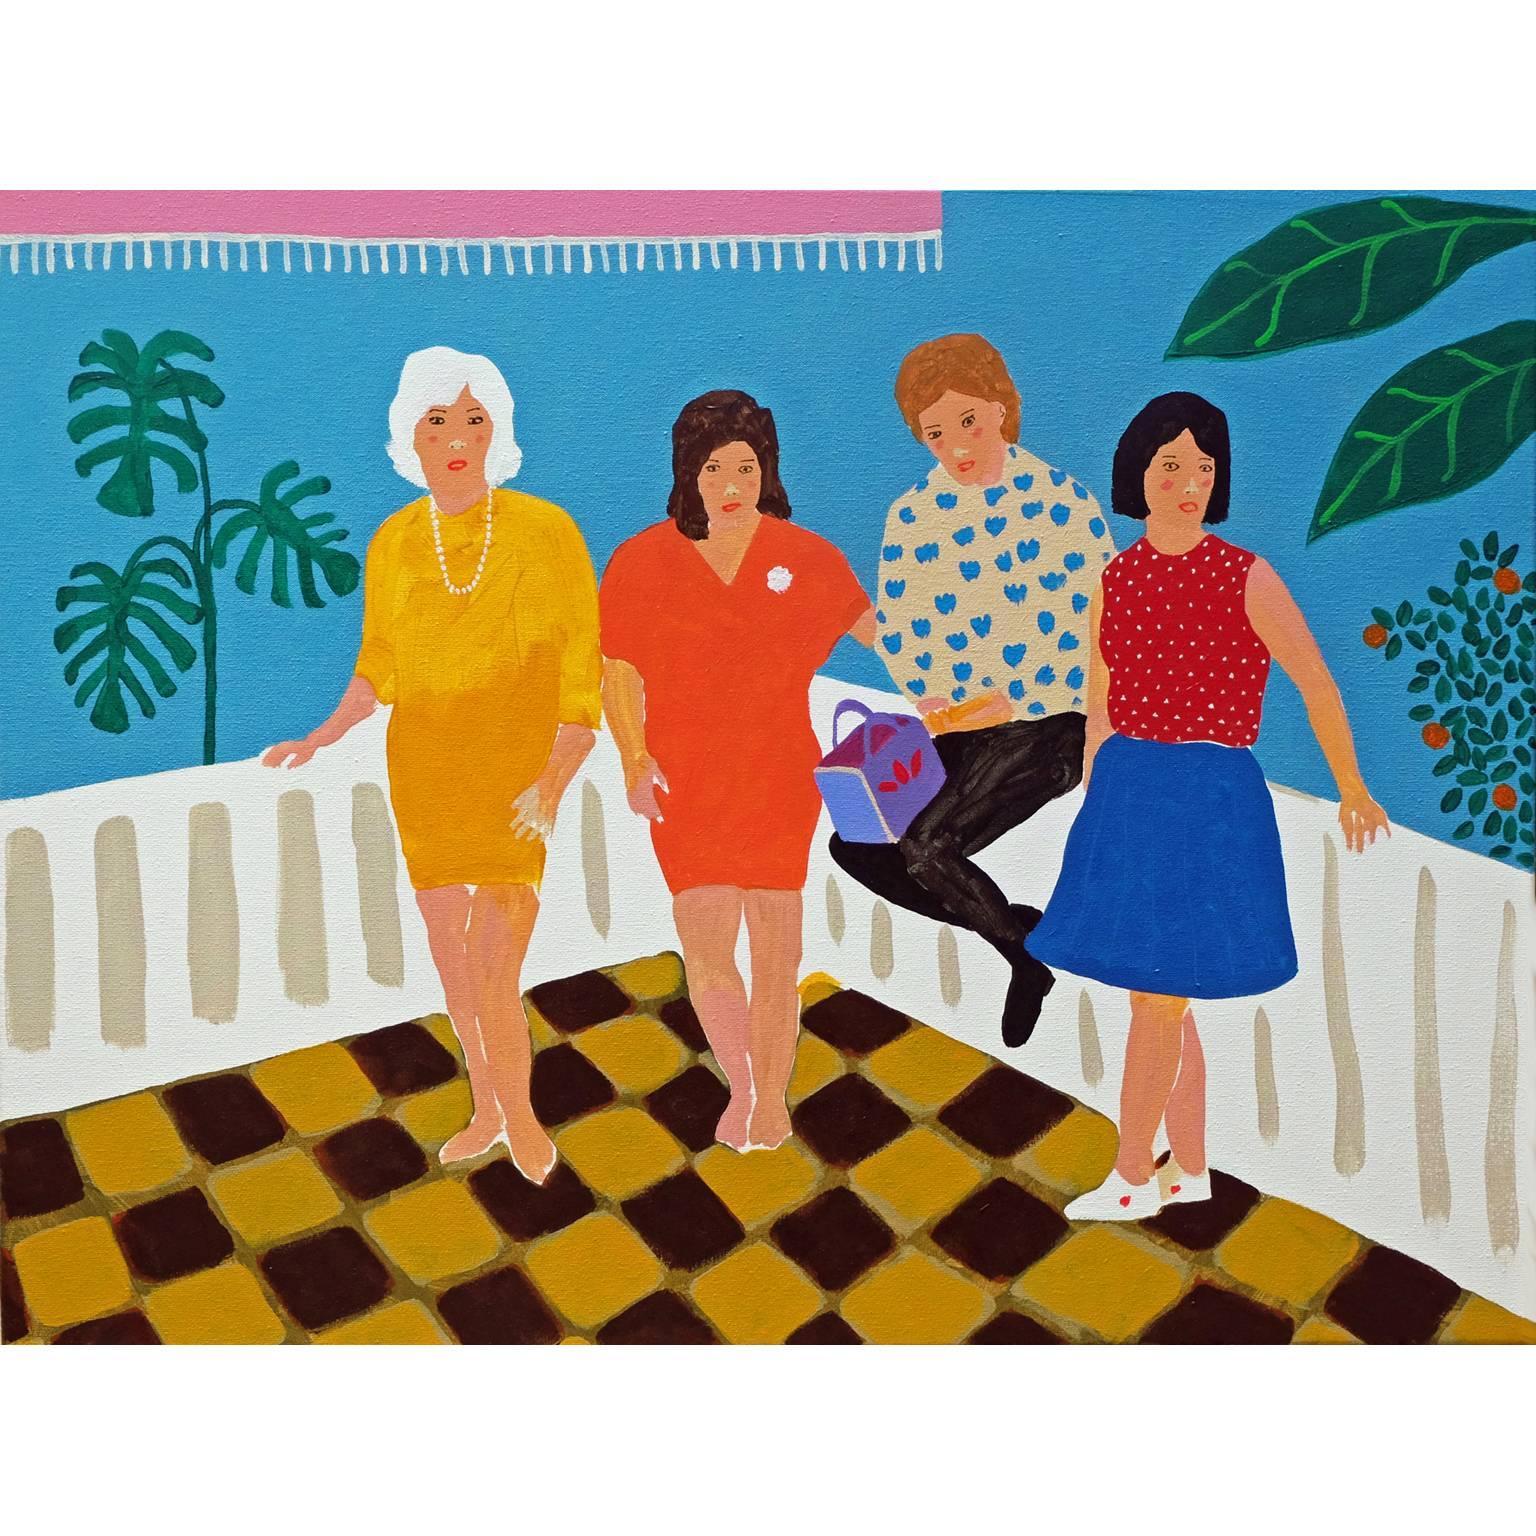 'Last Night of the Holiday' Portrait Painting by Alan Fears Pop Art